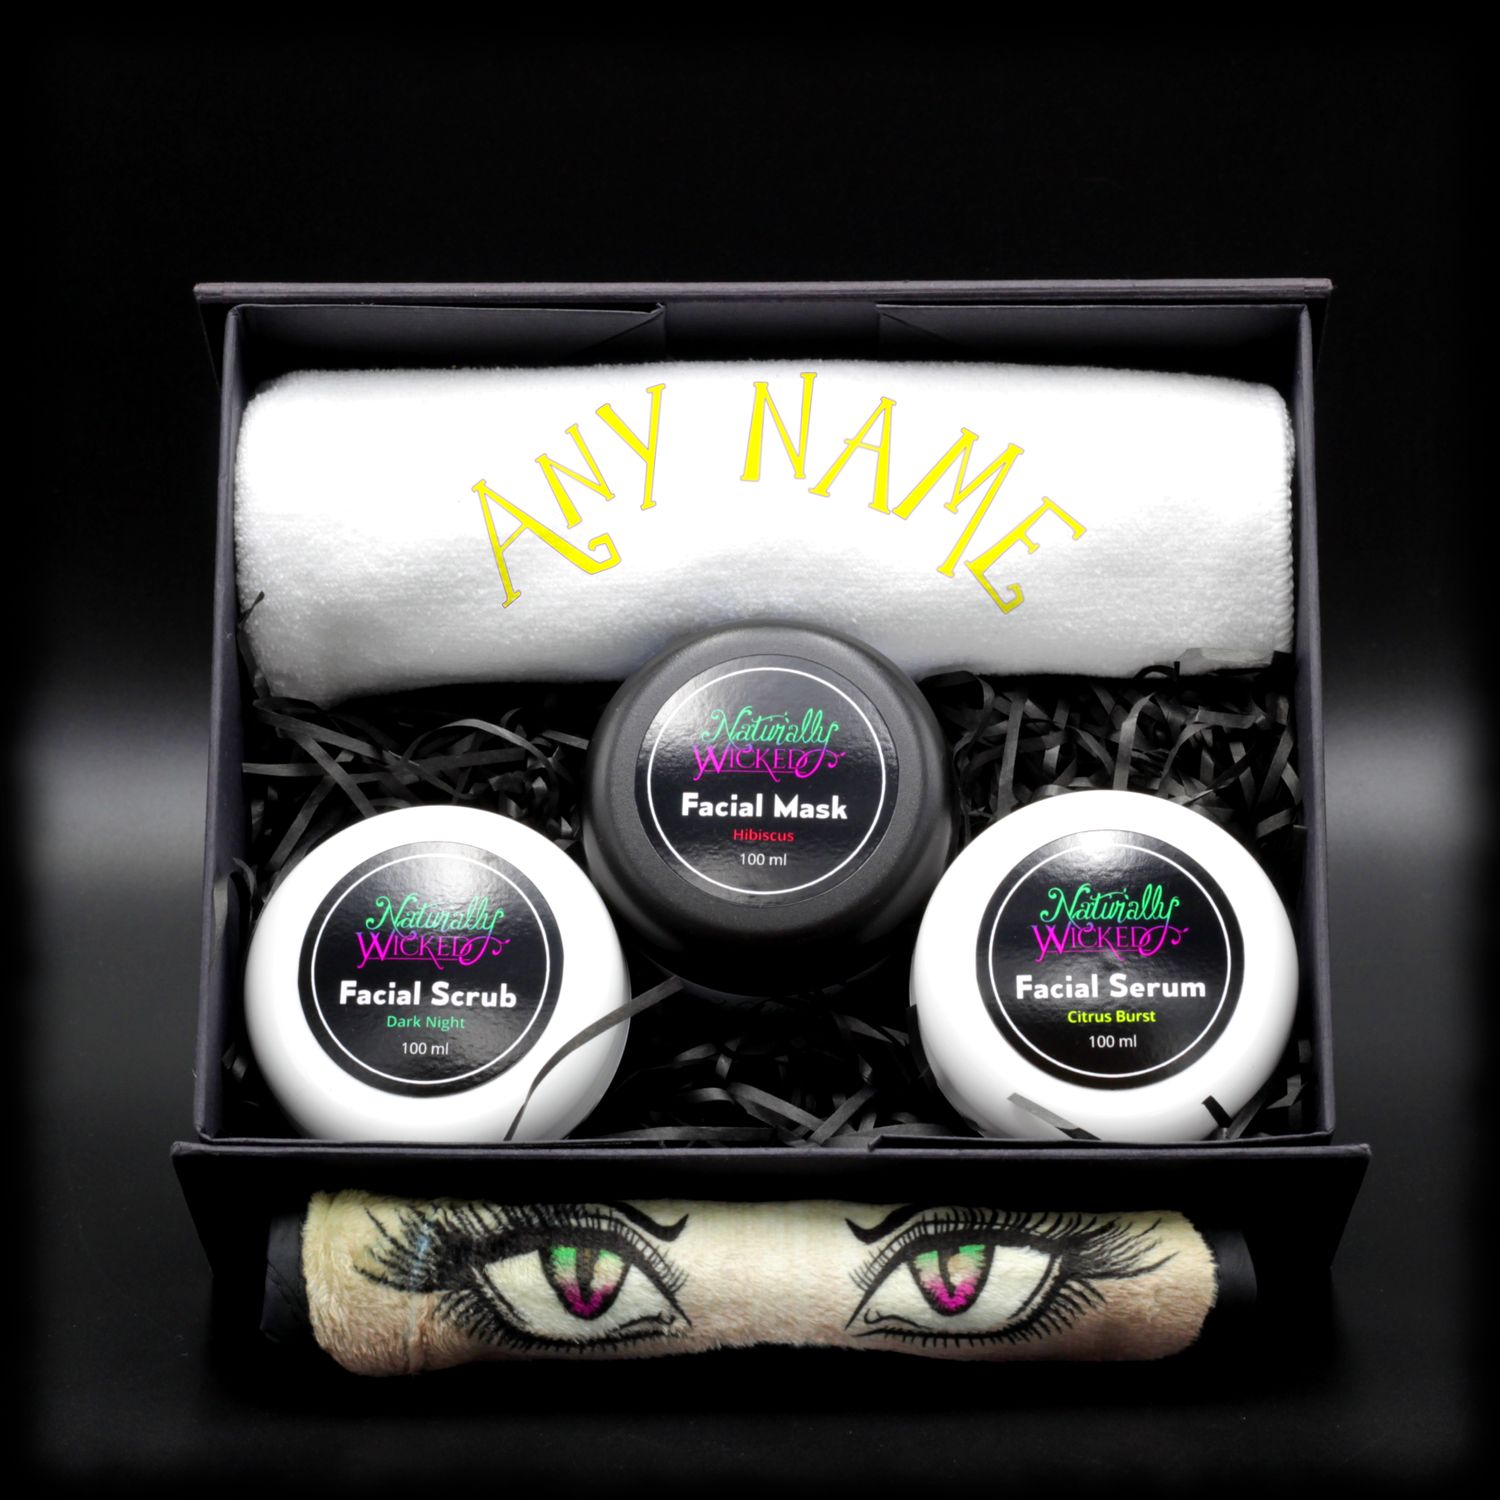 Naturally Wicked Facial Kit With Personalised Wicked Storm Queen Towel, Facial Scrub, Facial Mask & Facial Serum - Perfect Gift For Her